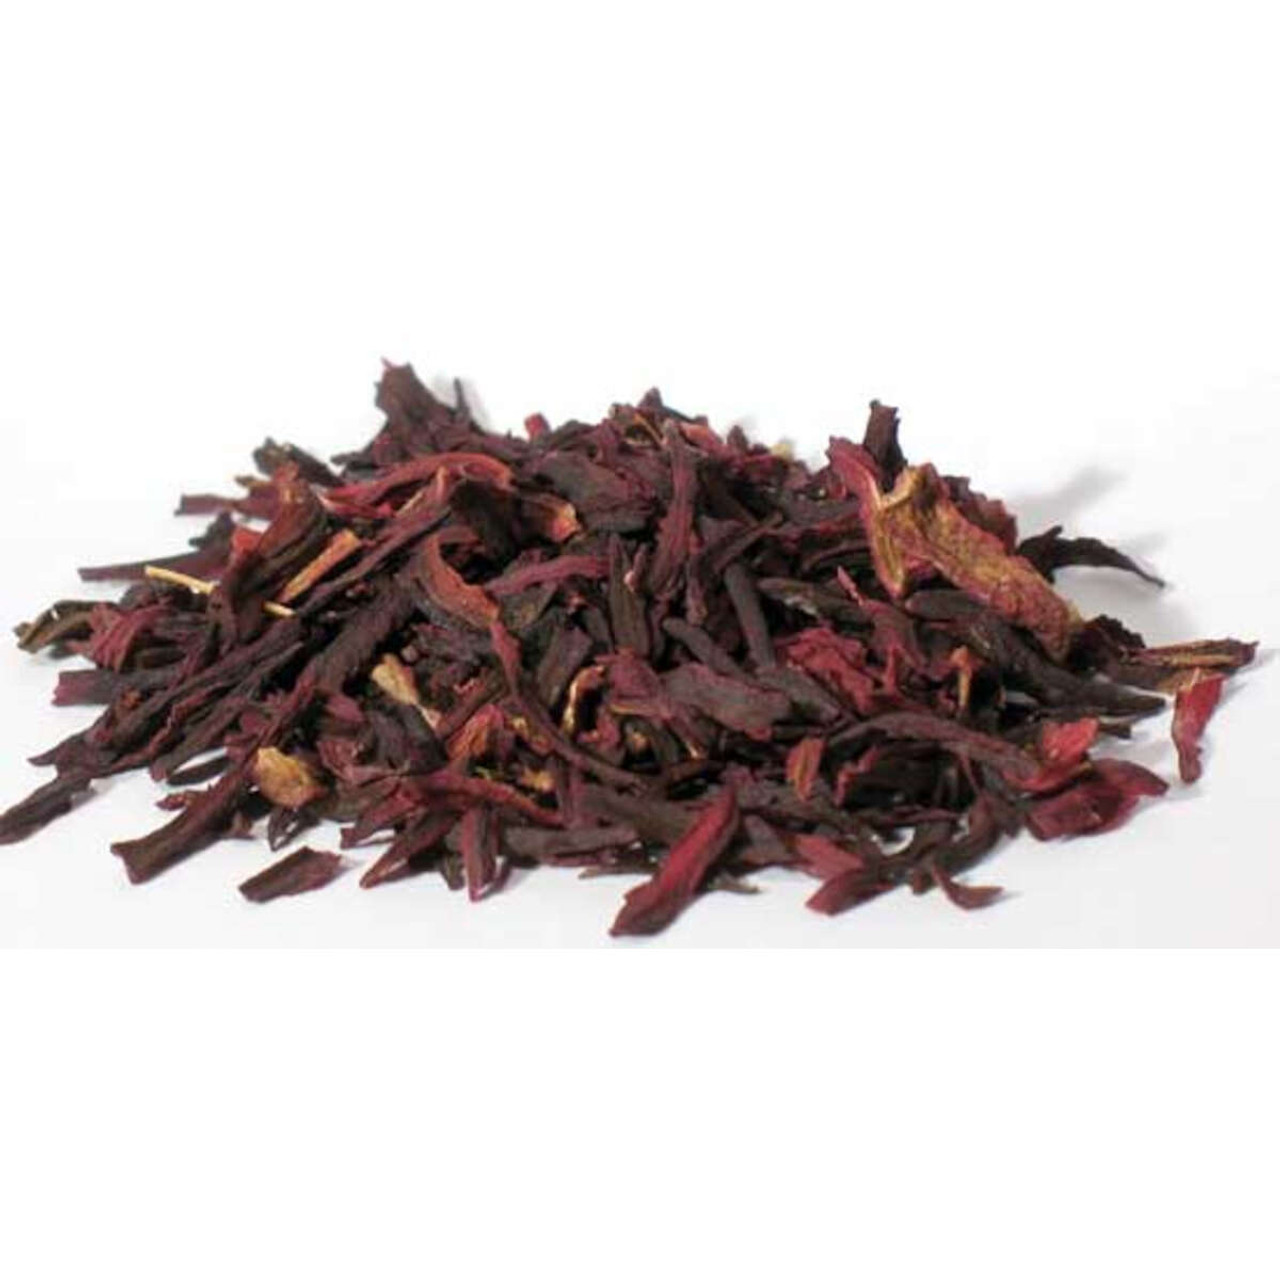 Hibiscus Flower 1 lb. whole